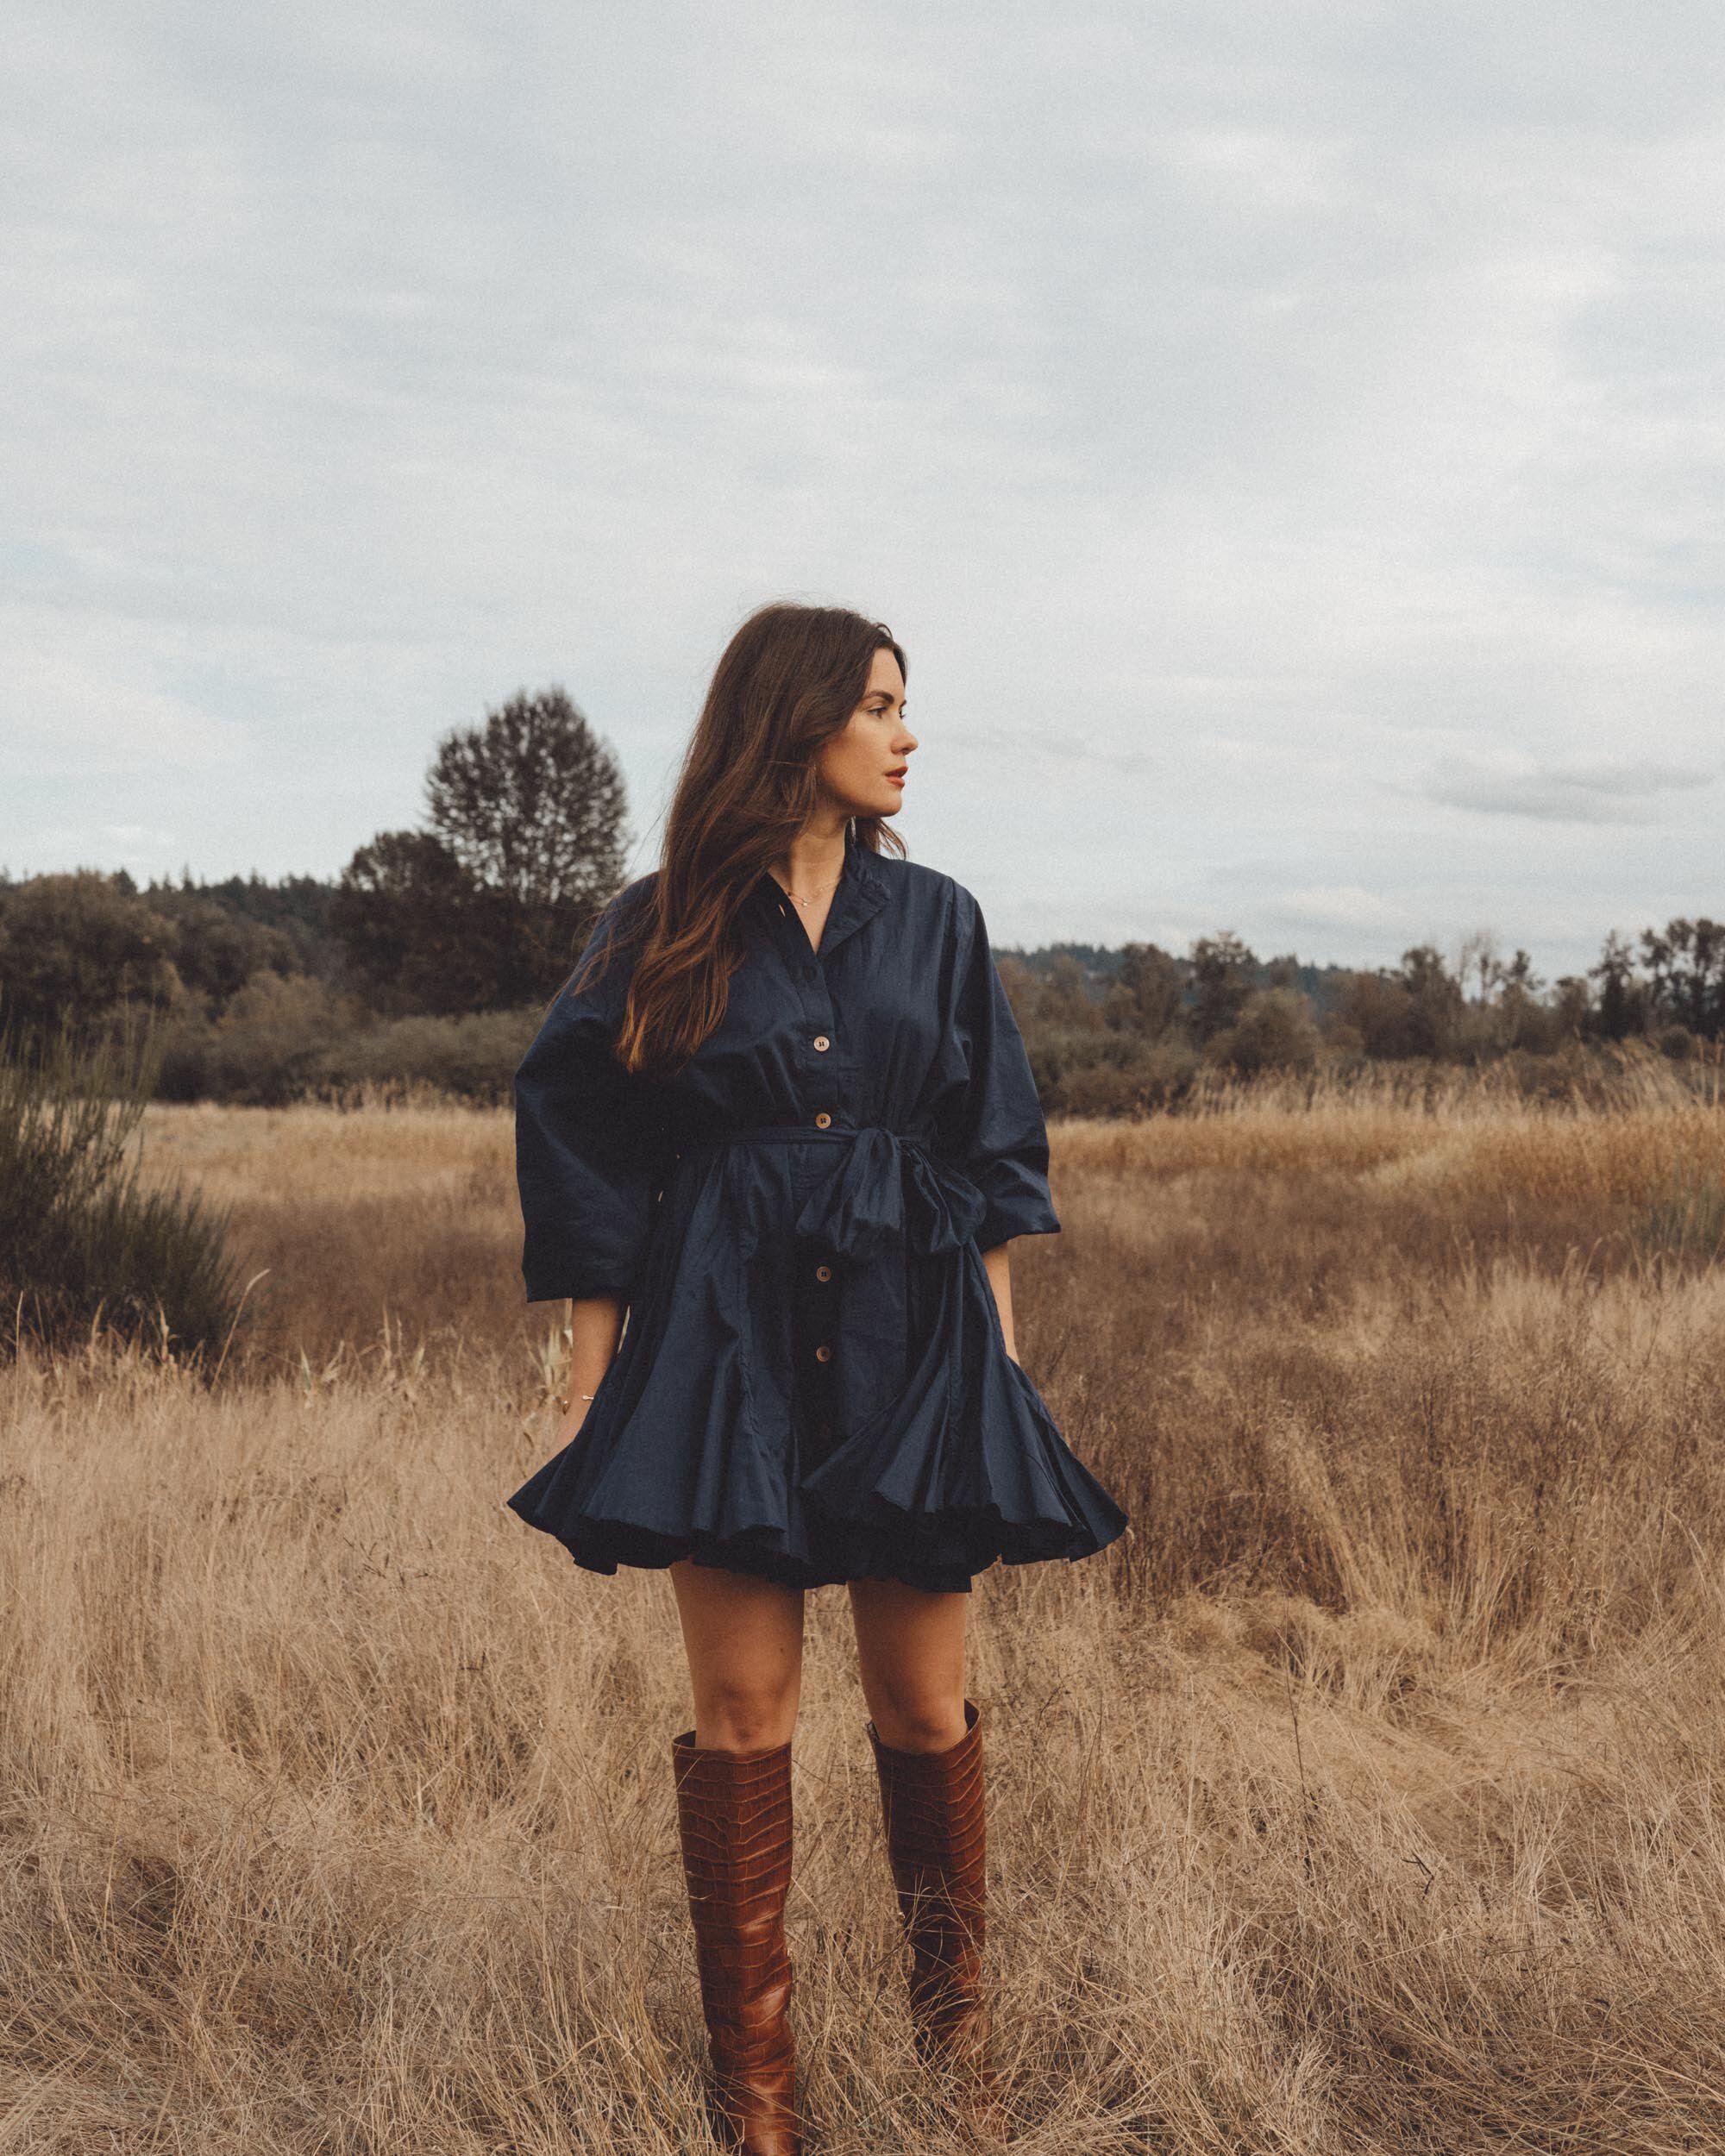 Chic Fall Dress Outfit. Sarah Butler of @sarahchristine wearing Rhode Emma Tie-Waist Flared Navy Dress and Brown Croc Knee High Boot in Seattle, Washington --8.jpg